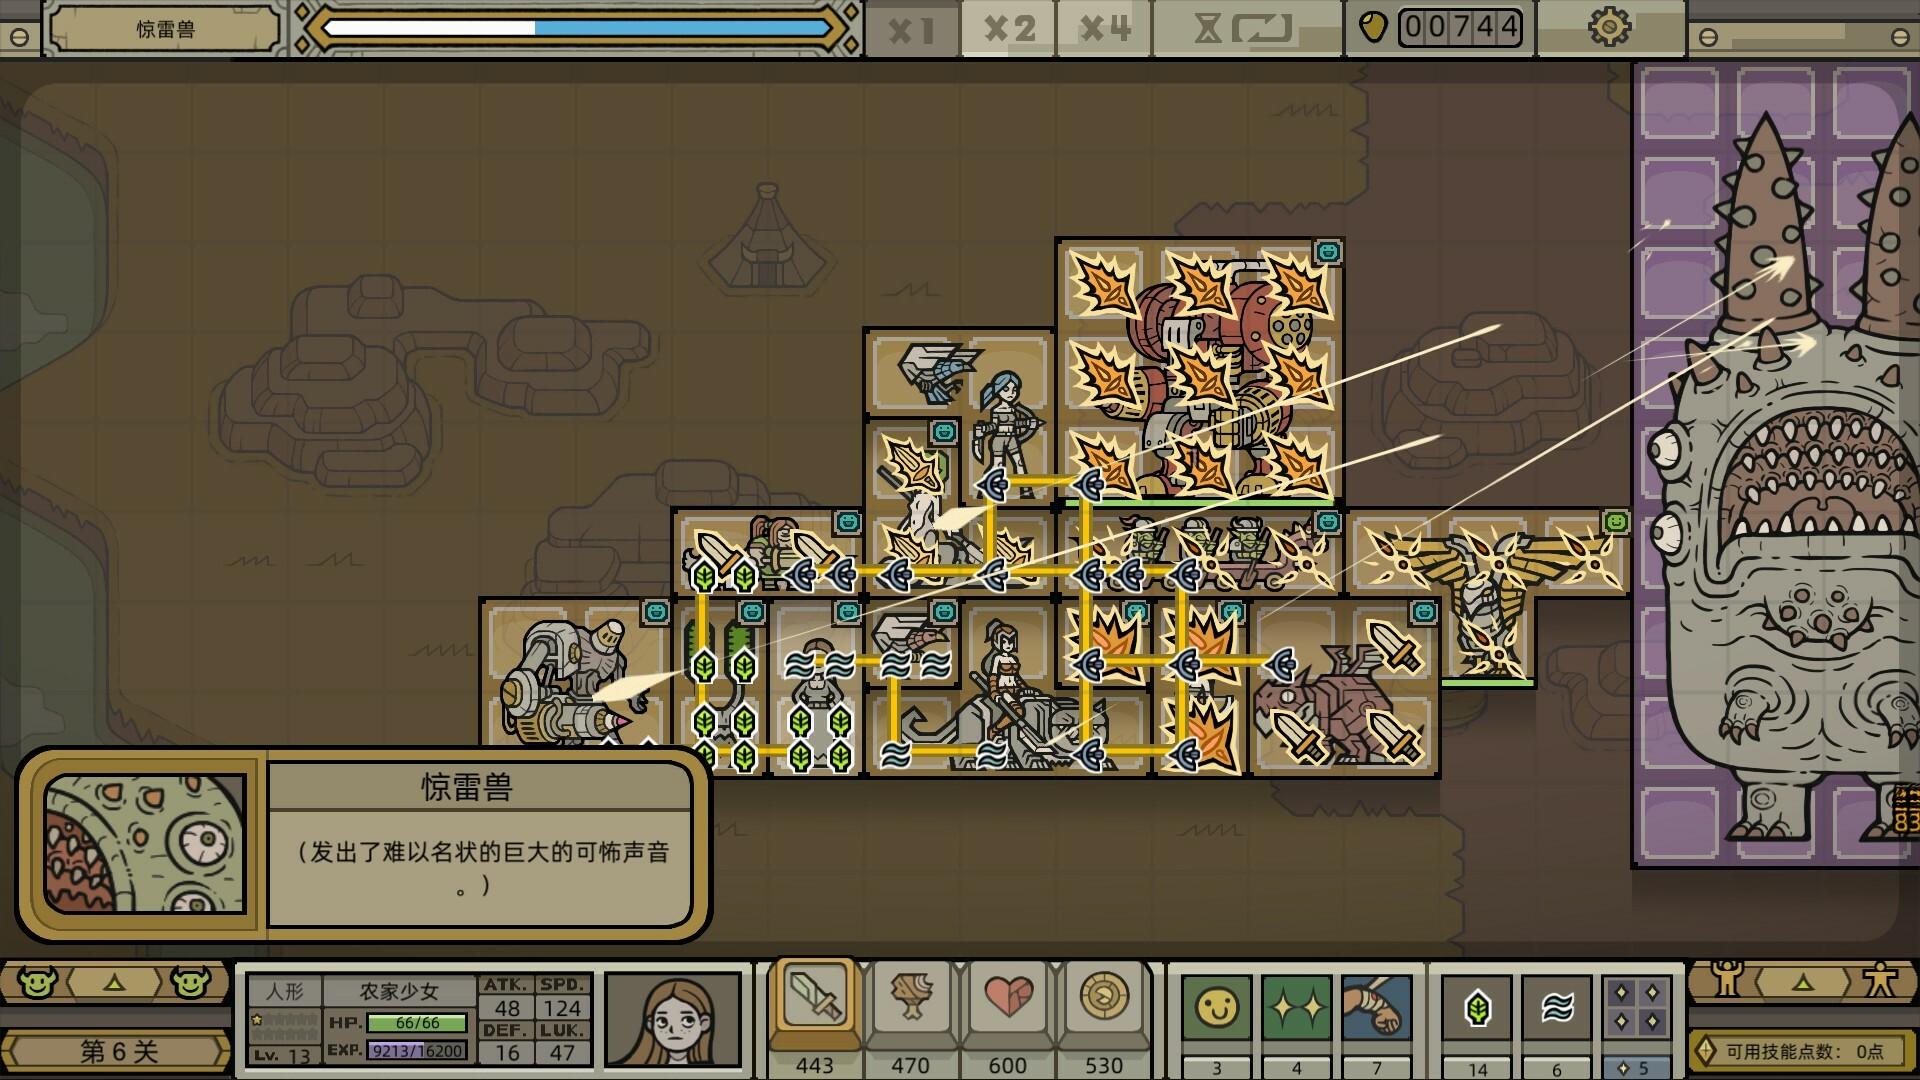 Screenshot №4 from game LEGIONCRAFT